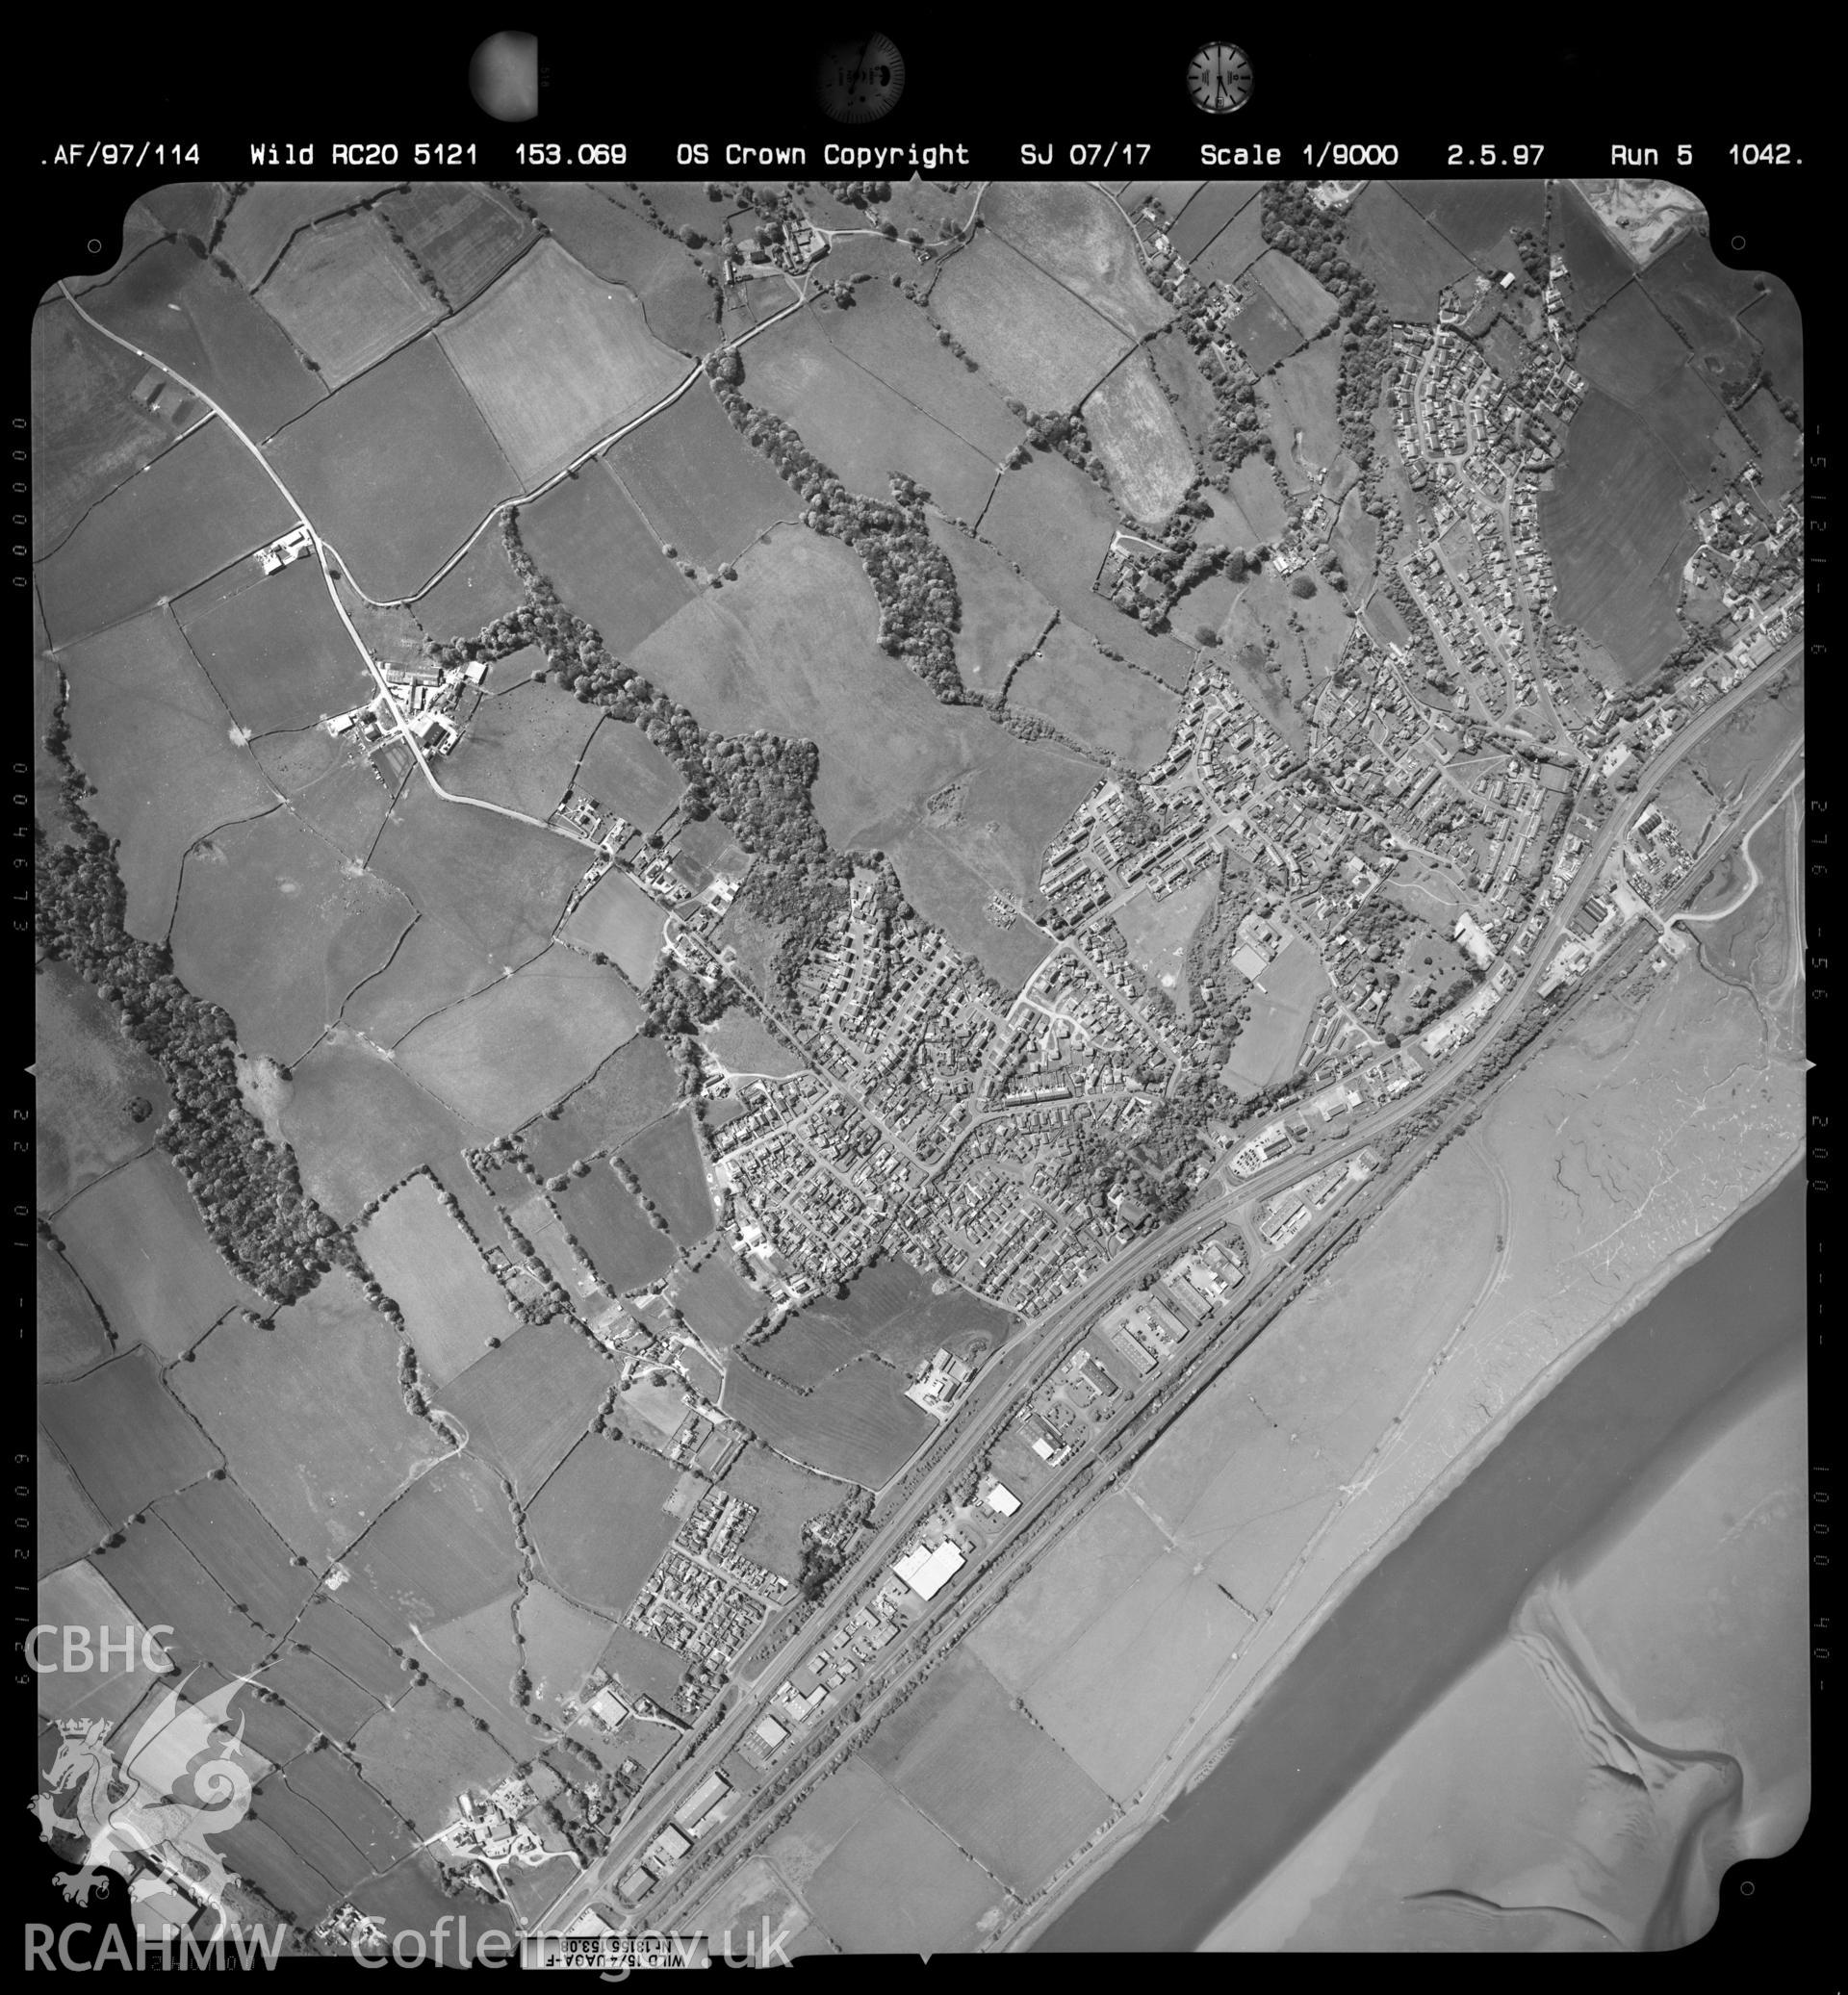 Digitized copy of an aerial photograph showing the Bagillt area, taken by Ordnance Survey, May 1997.